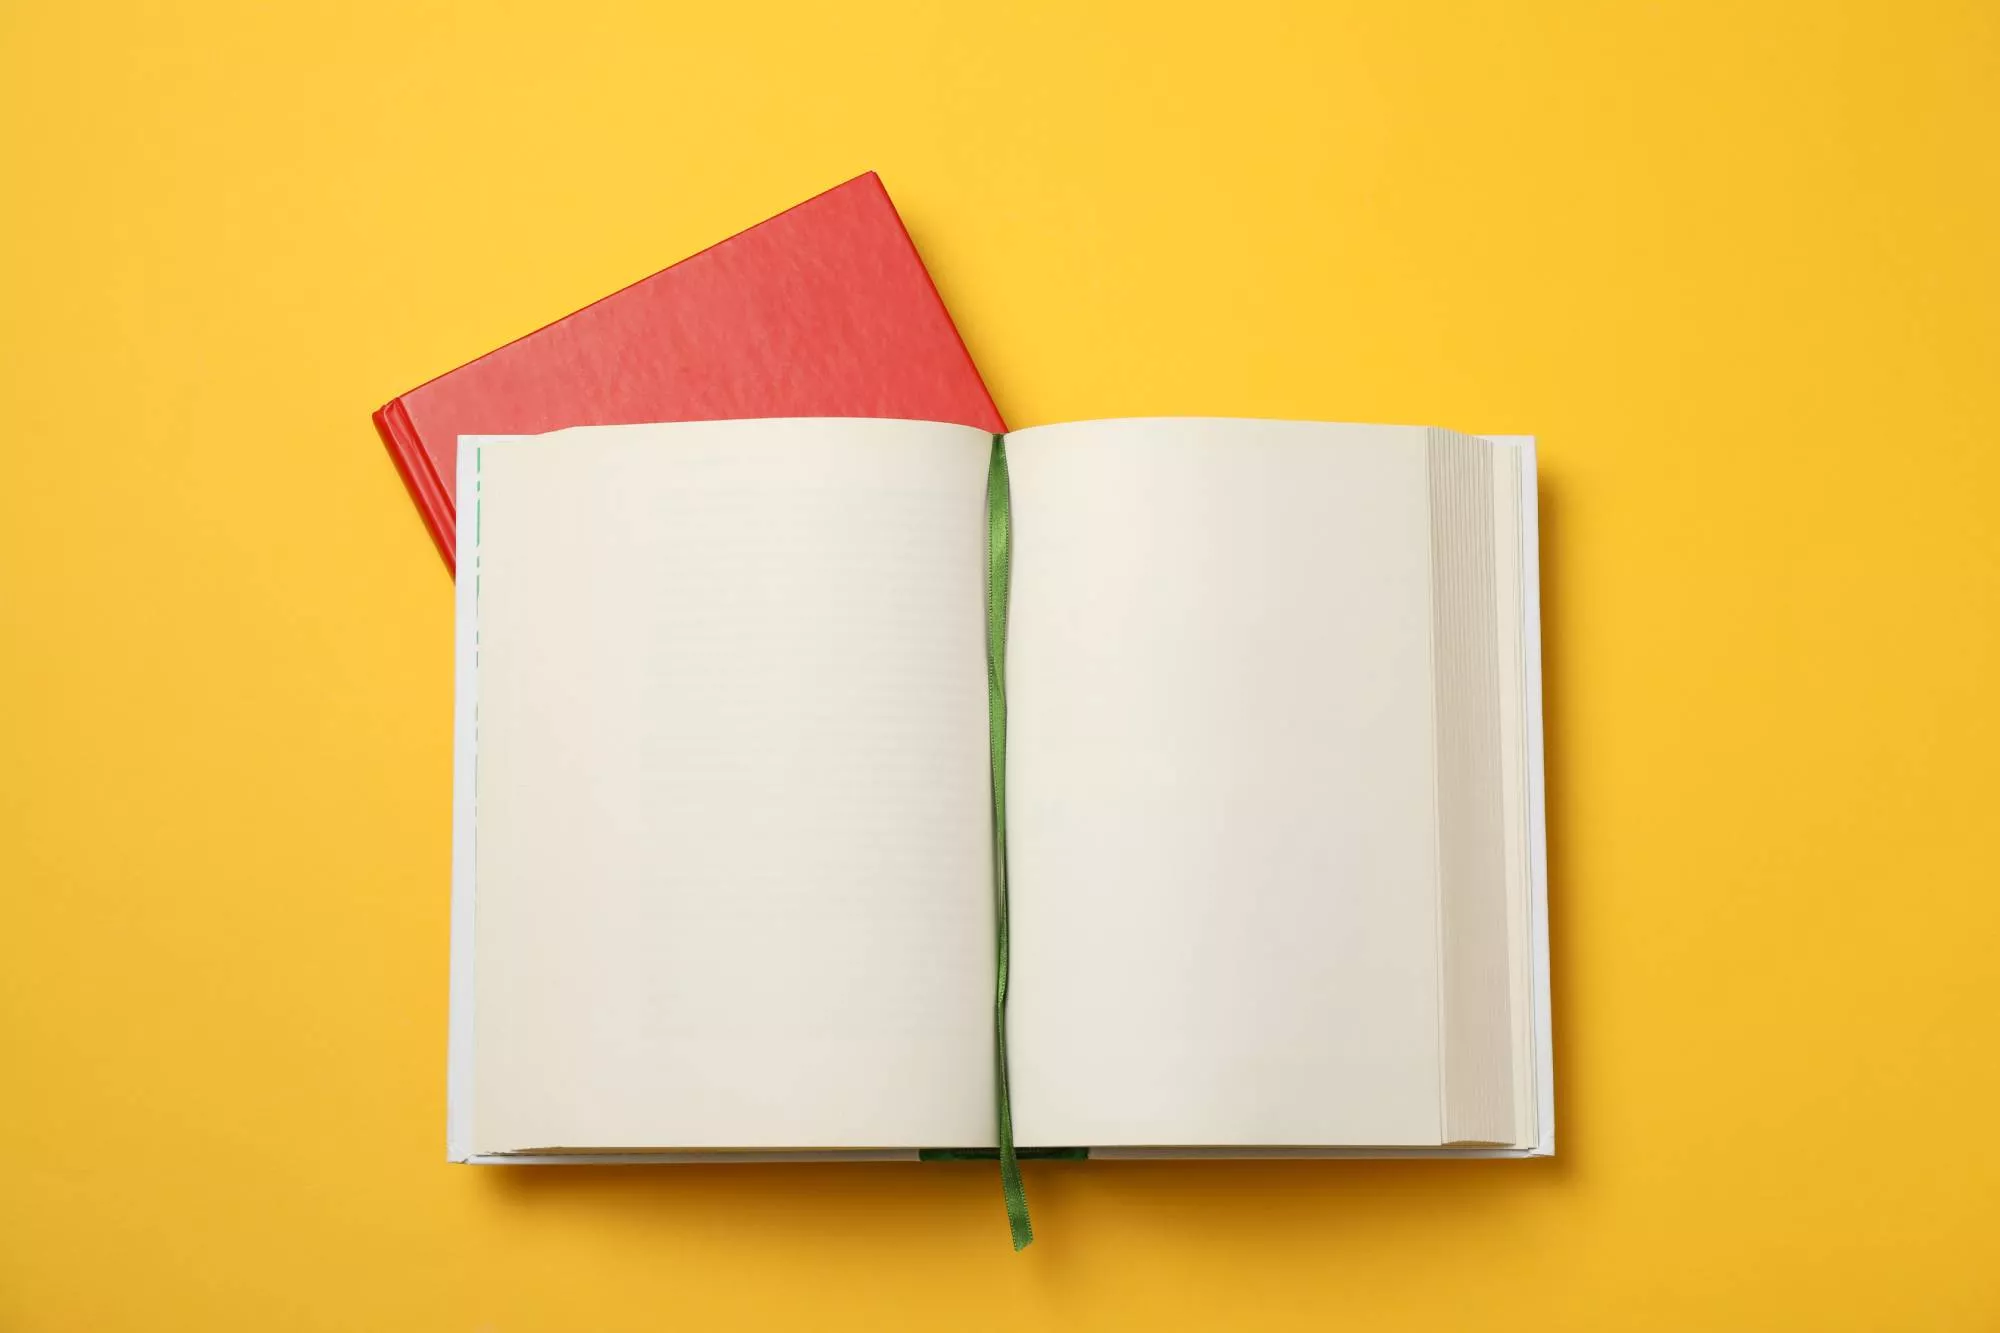 a blank open book on a yellow background ready for a writer to put brand storytelling in it